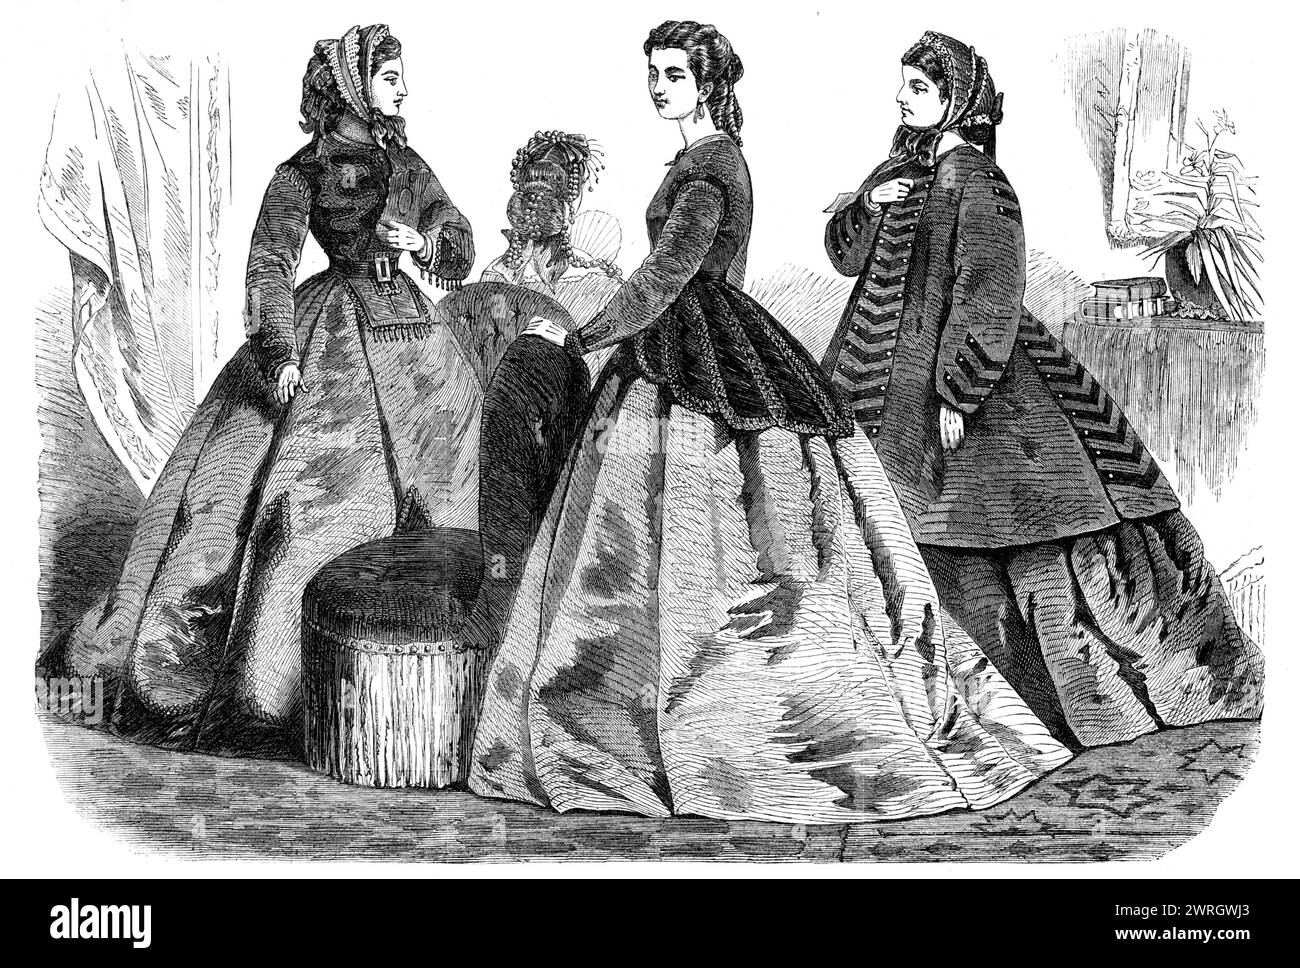 Paris fashions for January 1865, (1864). 'Fig. 1. Evening Dress. Robe of pale rose-coloured taffety, the corsage &#xe0; ceinture ornamented with a sort of basquine composed of black velvet bands trimmed with lace. The sleeves are provided with a narrow trimming to match...Fig. 2. Visiting Dress. Fawn-coloured robe of poplin or taffety, with trimmings either in moire antique or velvet, several shades darker than that of the dress. Sometimes a plain light-coloured silk is chosen for this style of robe, and then the trimmings just mentioned are advantageously replaced by black satin ornaments. Ve Stock Photo